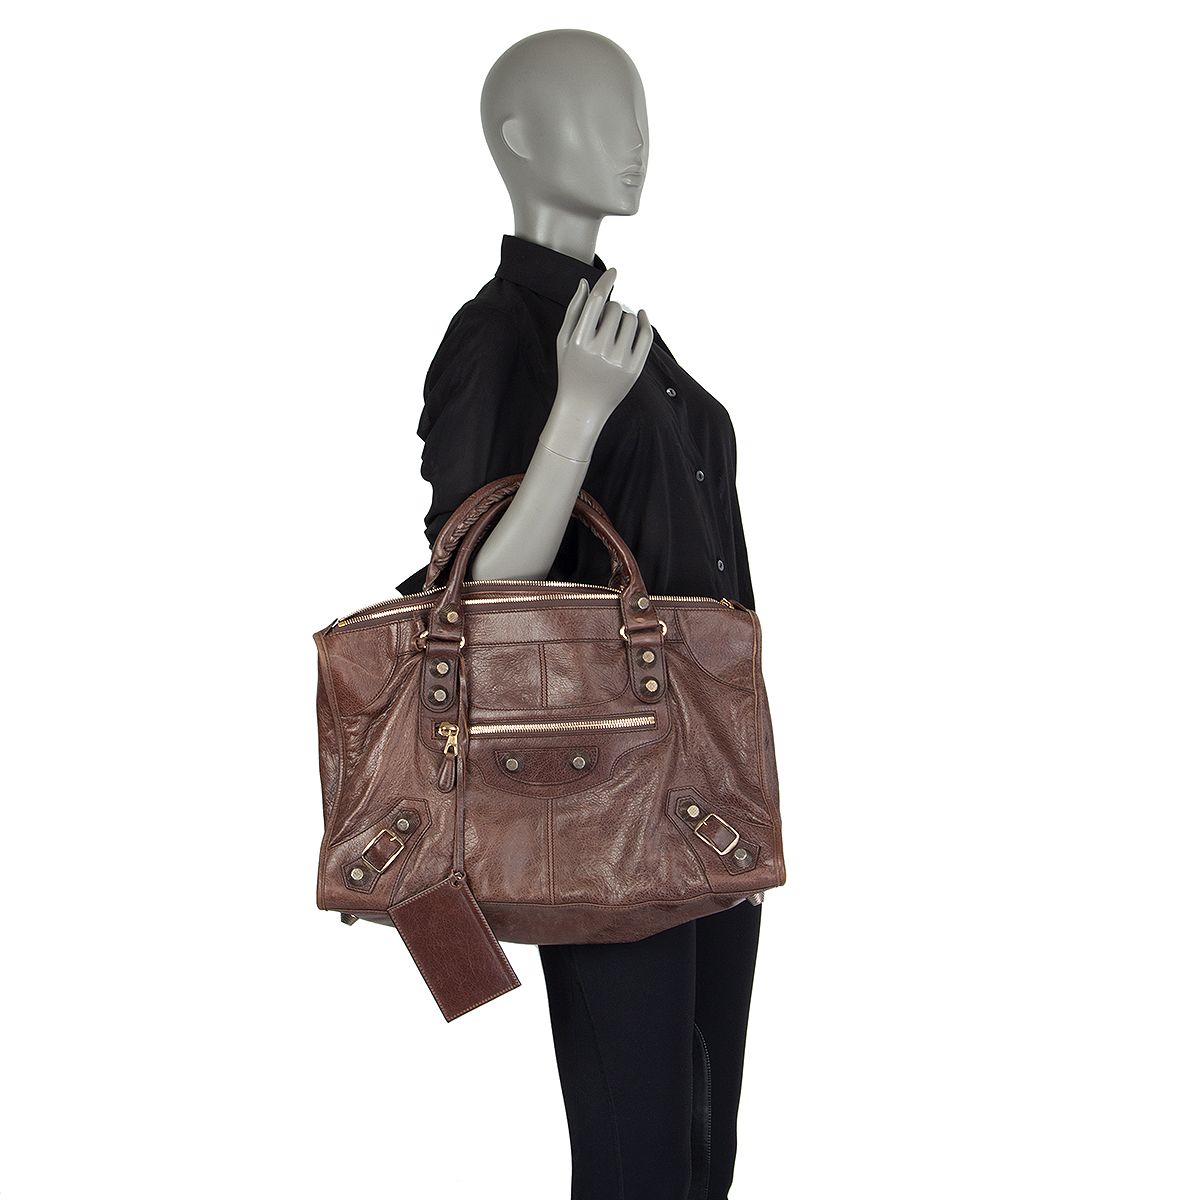 Unconscious Acquisition Objected Balenciaga Giant 12 Rose Gold Work Motorcycle Bag Castagna Brown Leather